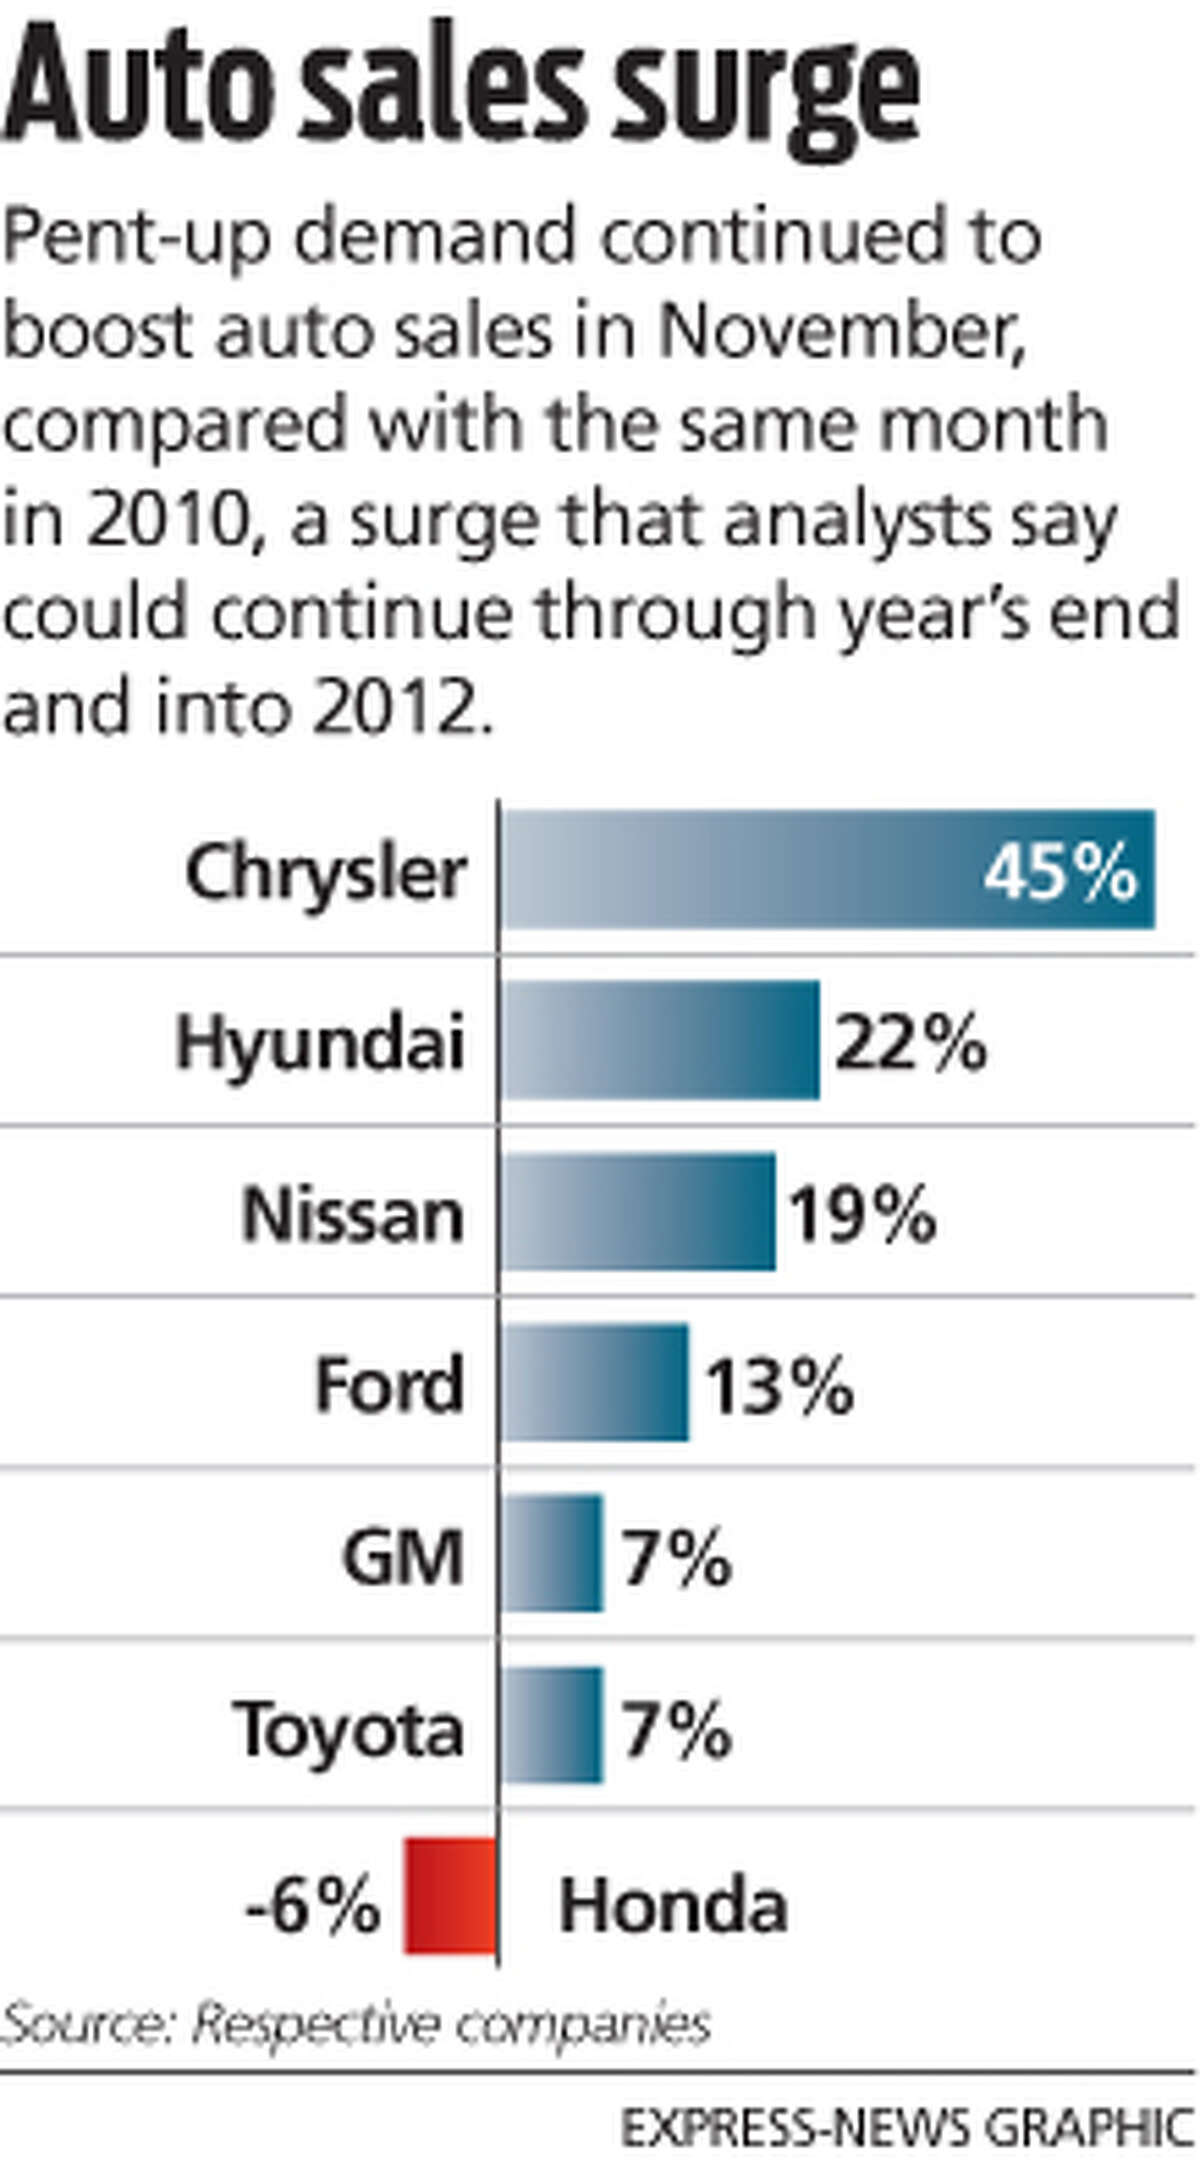 Auto sales surge Pent-up demand continued to boost auto sales in November, compared with the same month in 2010, a surge that analysts say could continue through year’s end and into 2012.